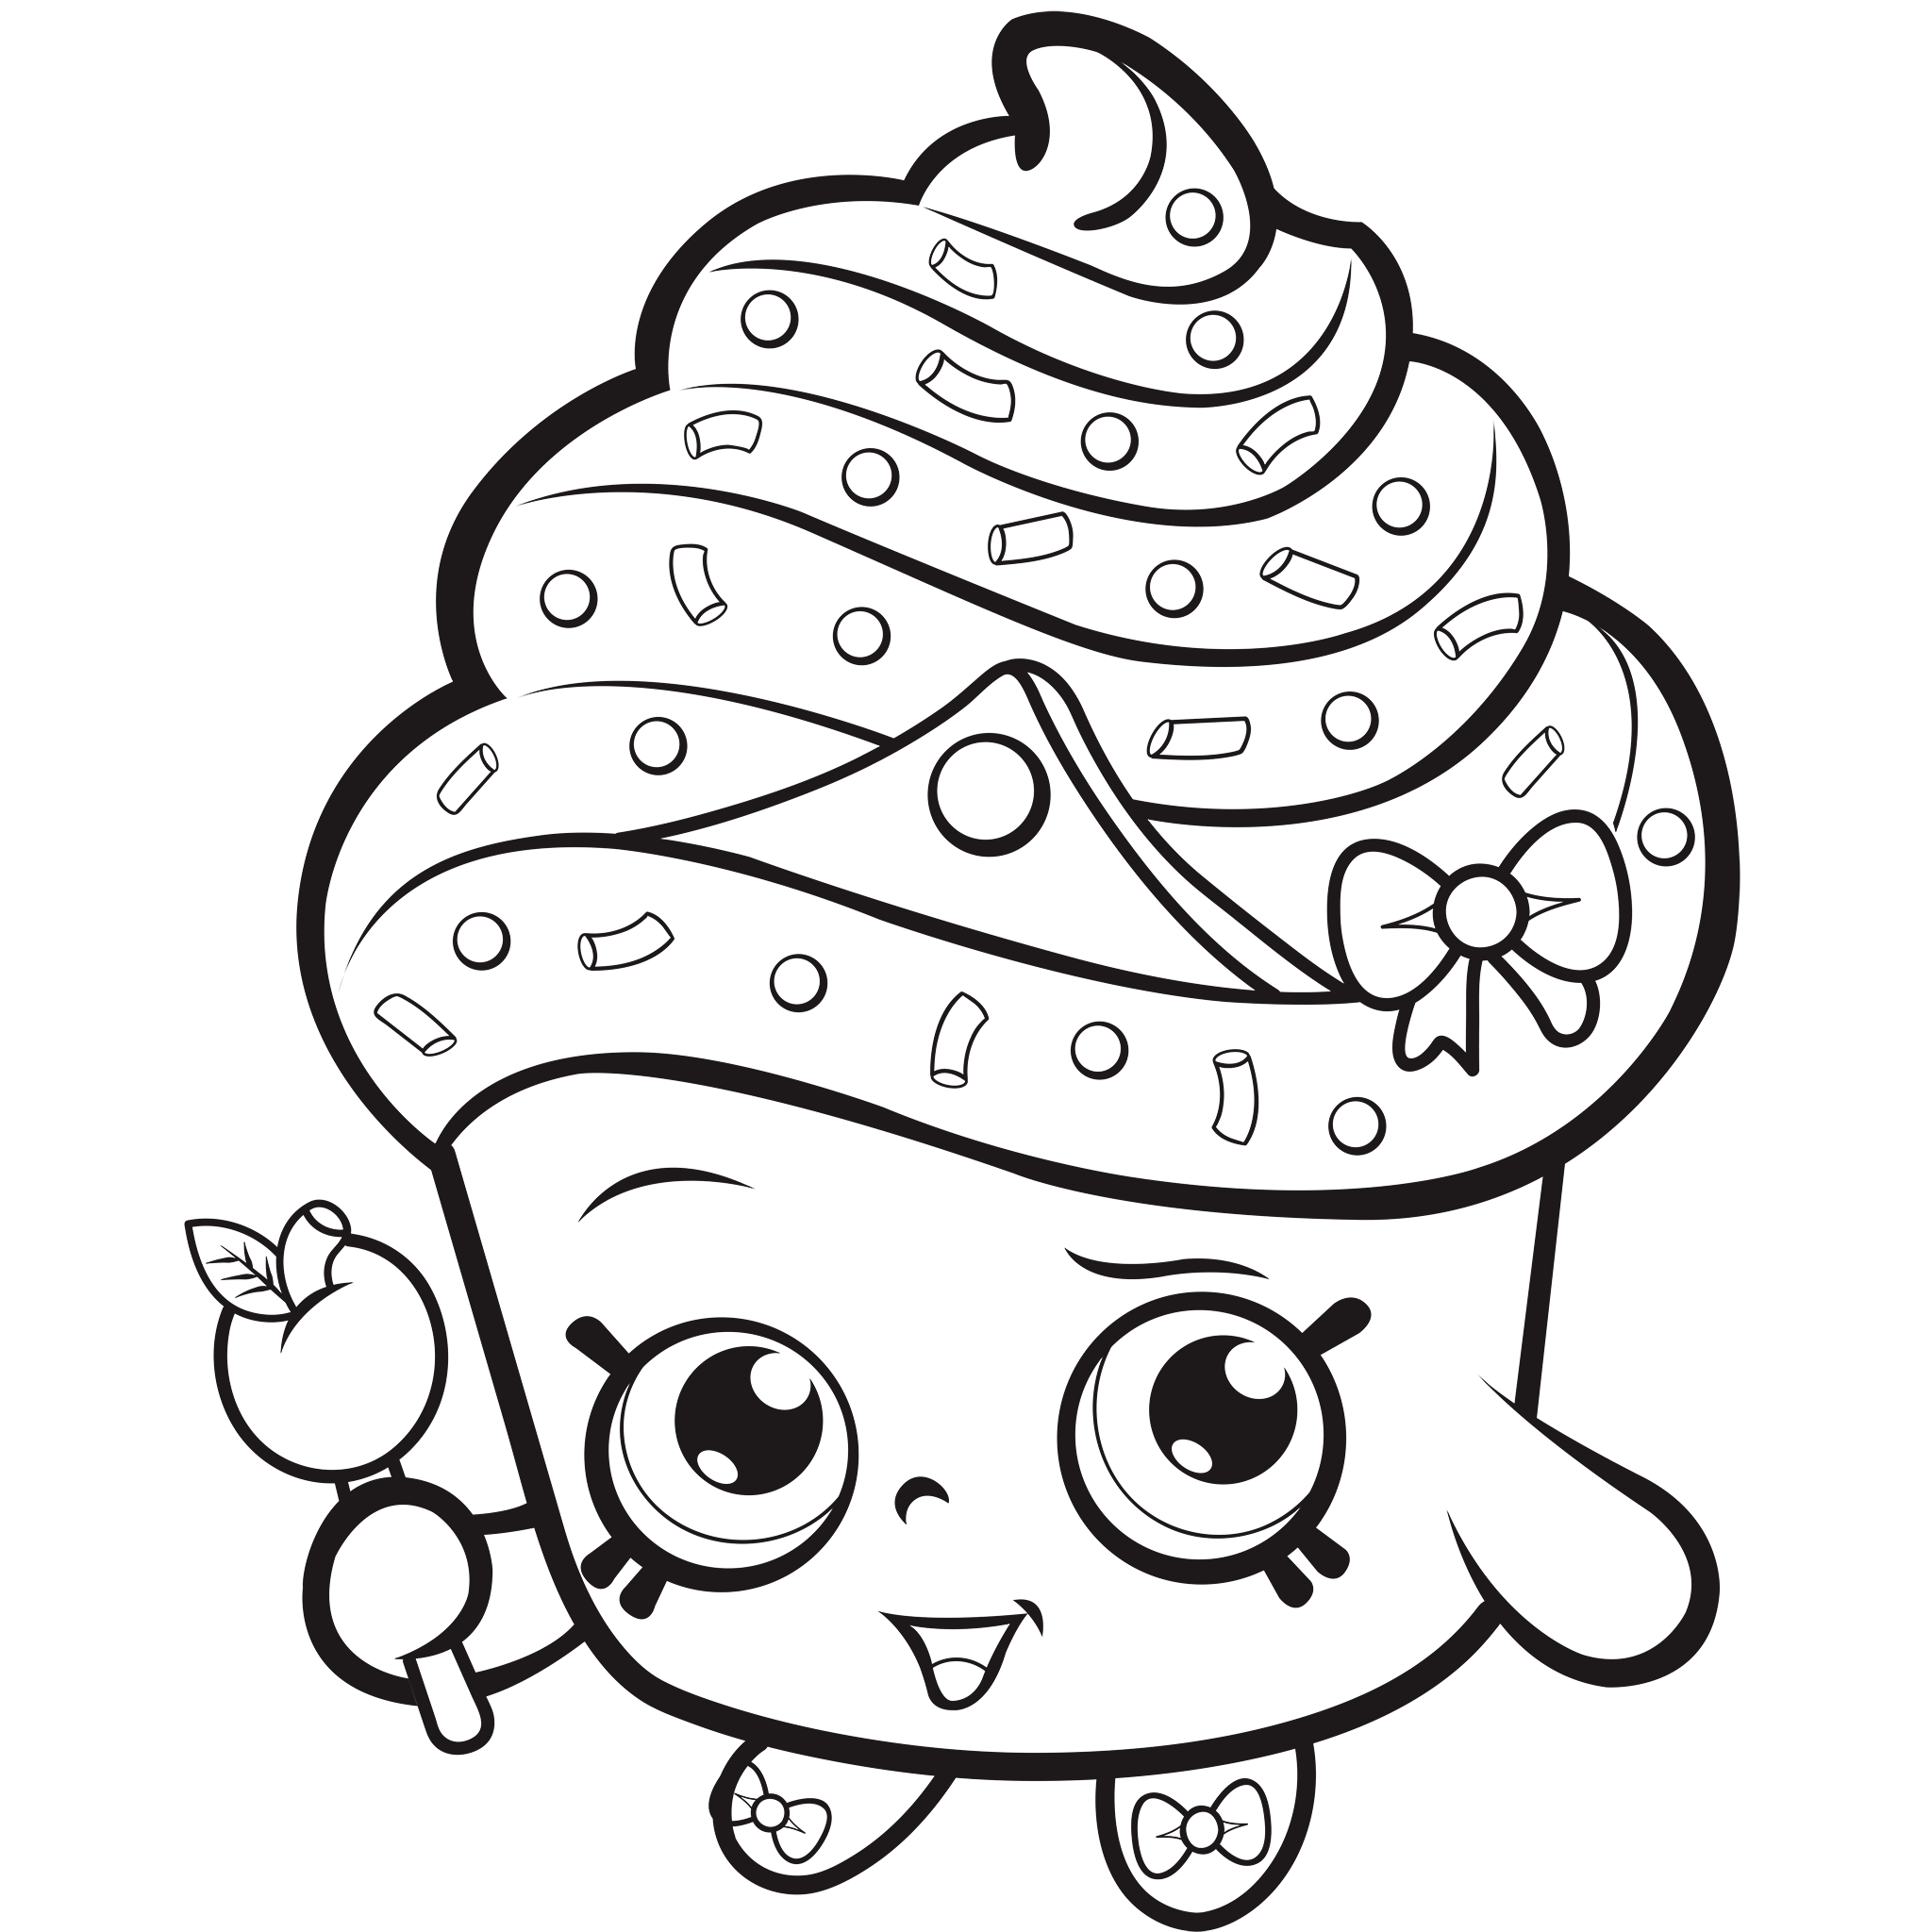 shopkins coloring pages to print free shopkins coloring pages best coloring pages for kids free shopkins pages coloring to print 1 1